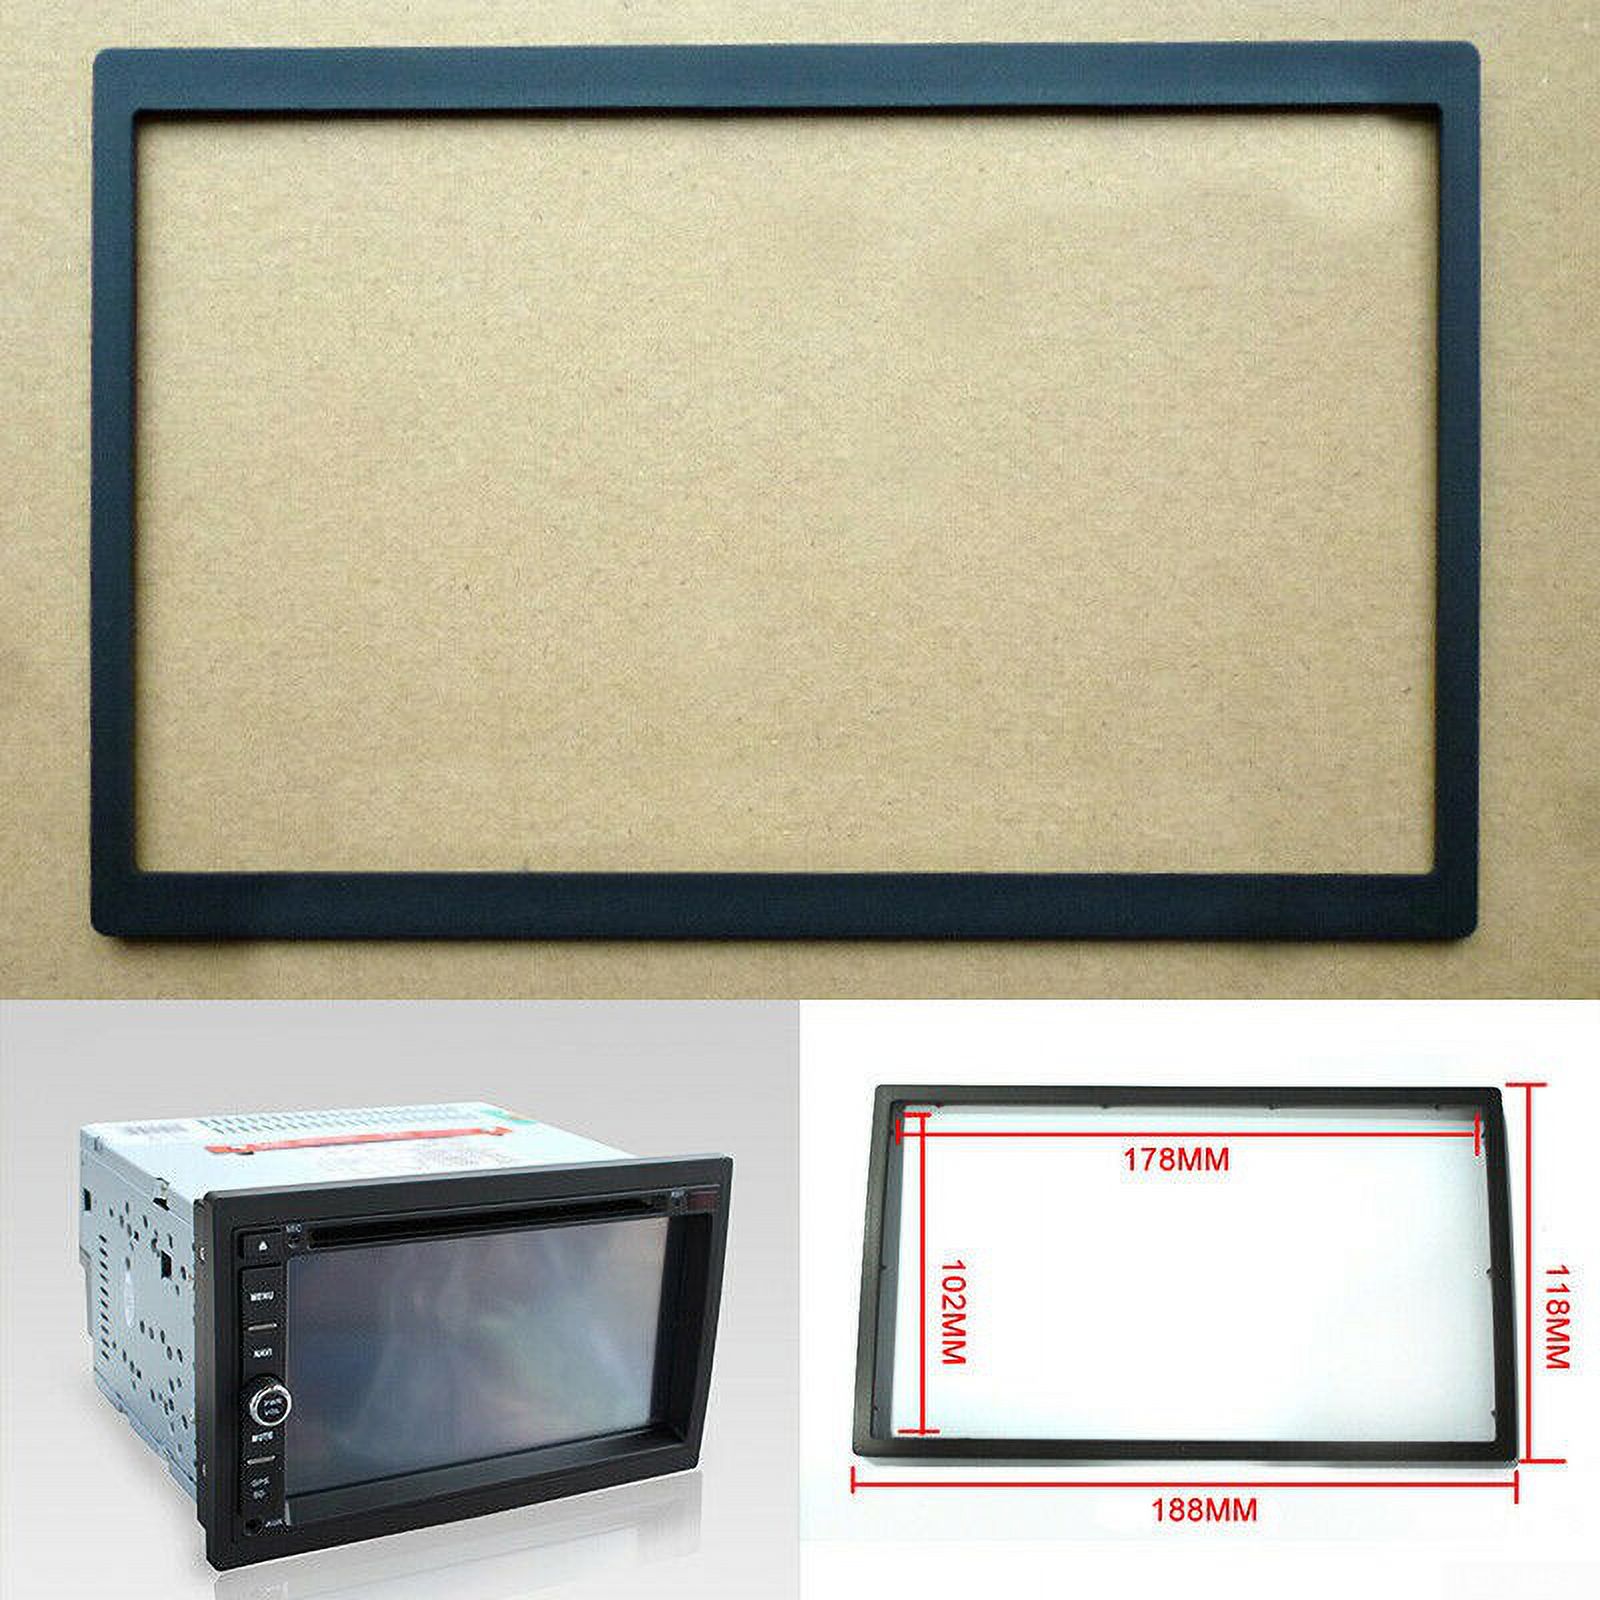 UHUSE 2Din Stereo Audio Dash Bezel Panel Mounting Frame for Car Radio DVD Player - image 1 of 6